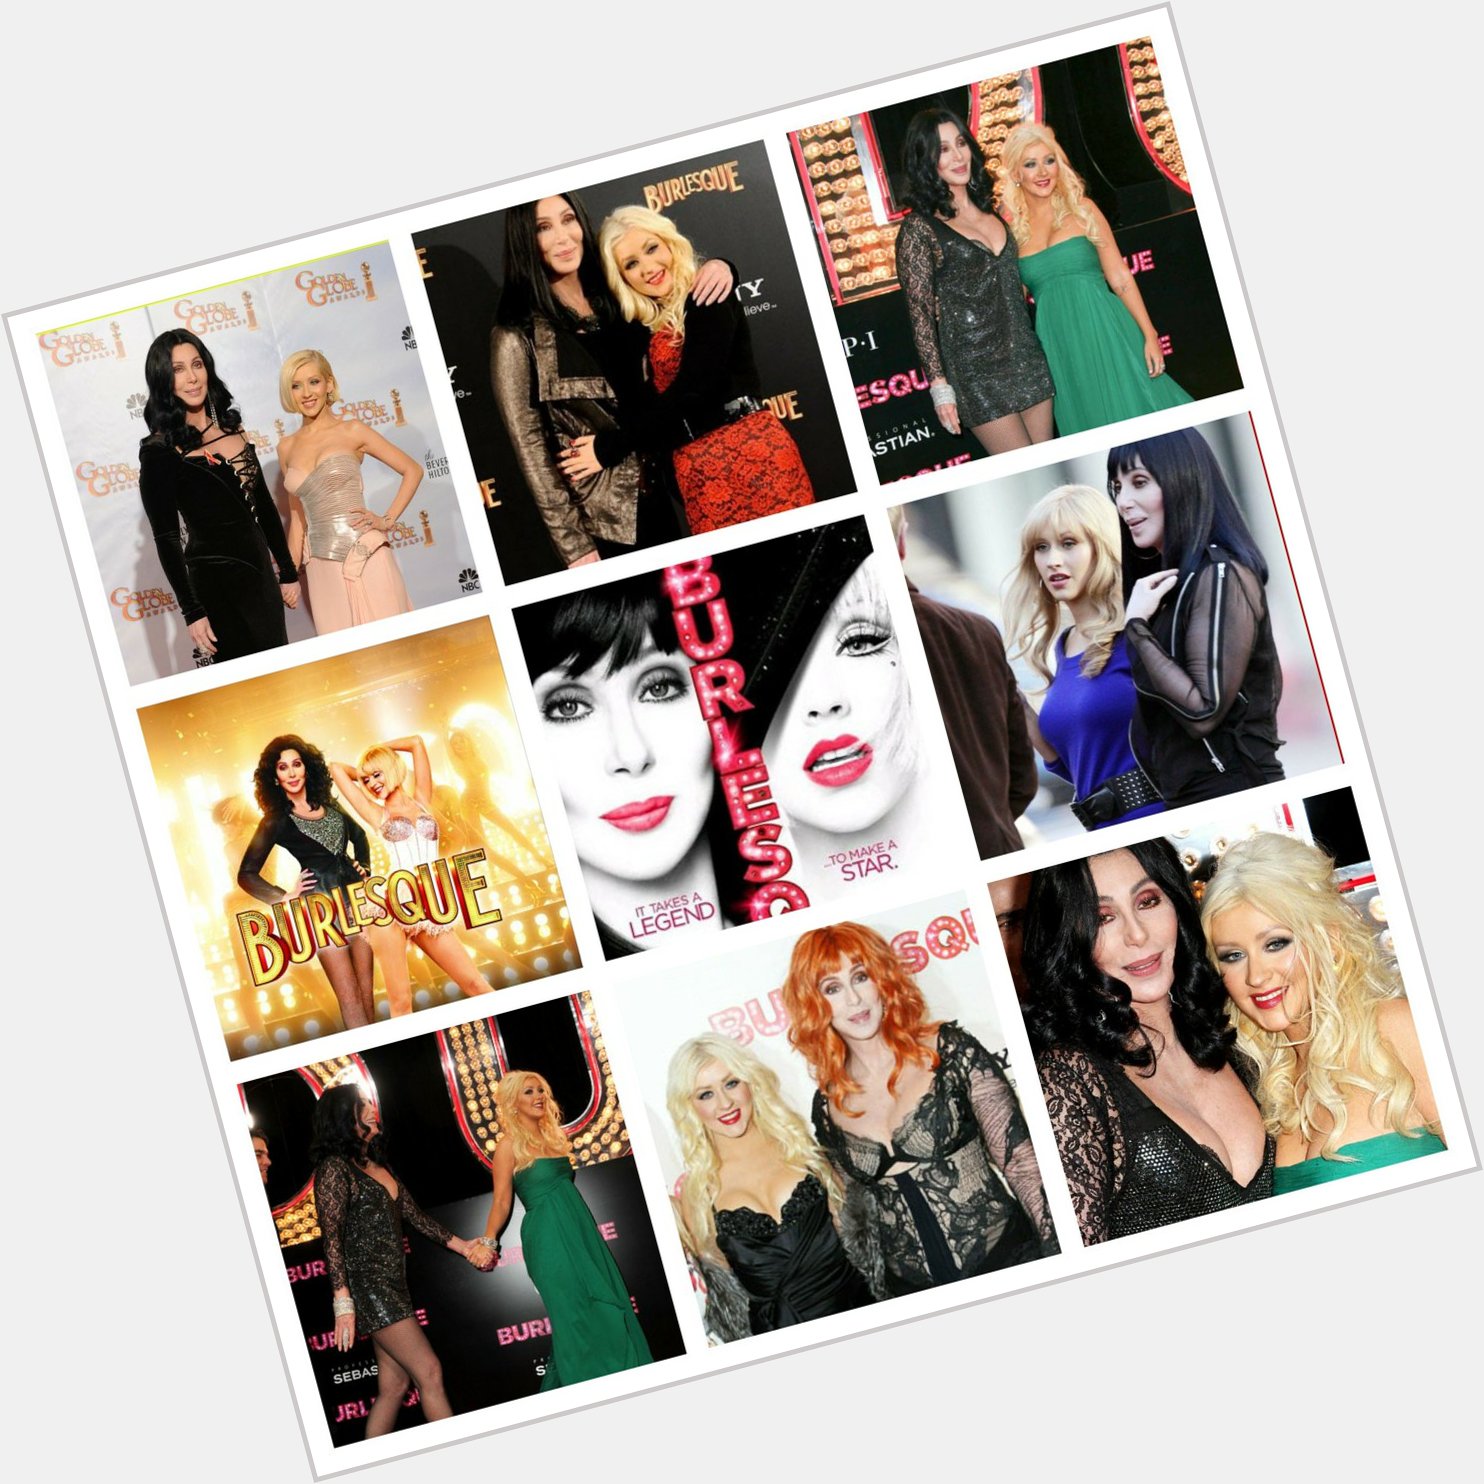  Cher today is the birthday of Christina Aguilera have made happy birthday to Christina Aguilera 